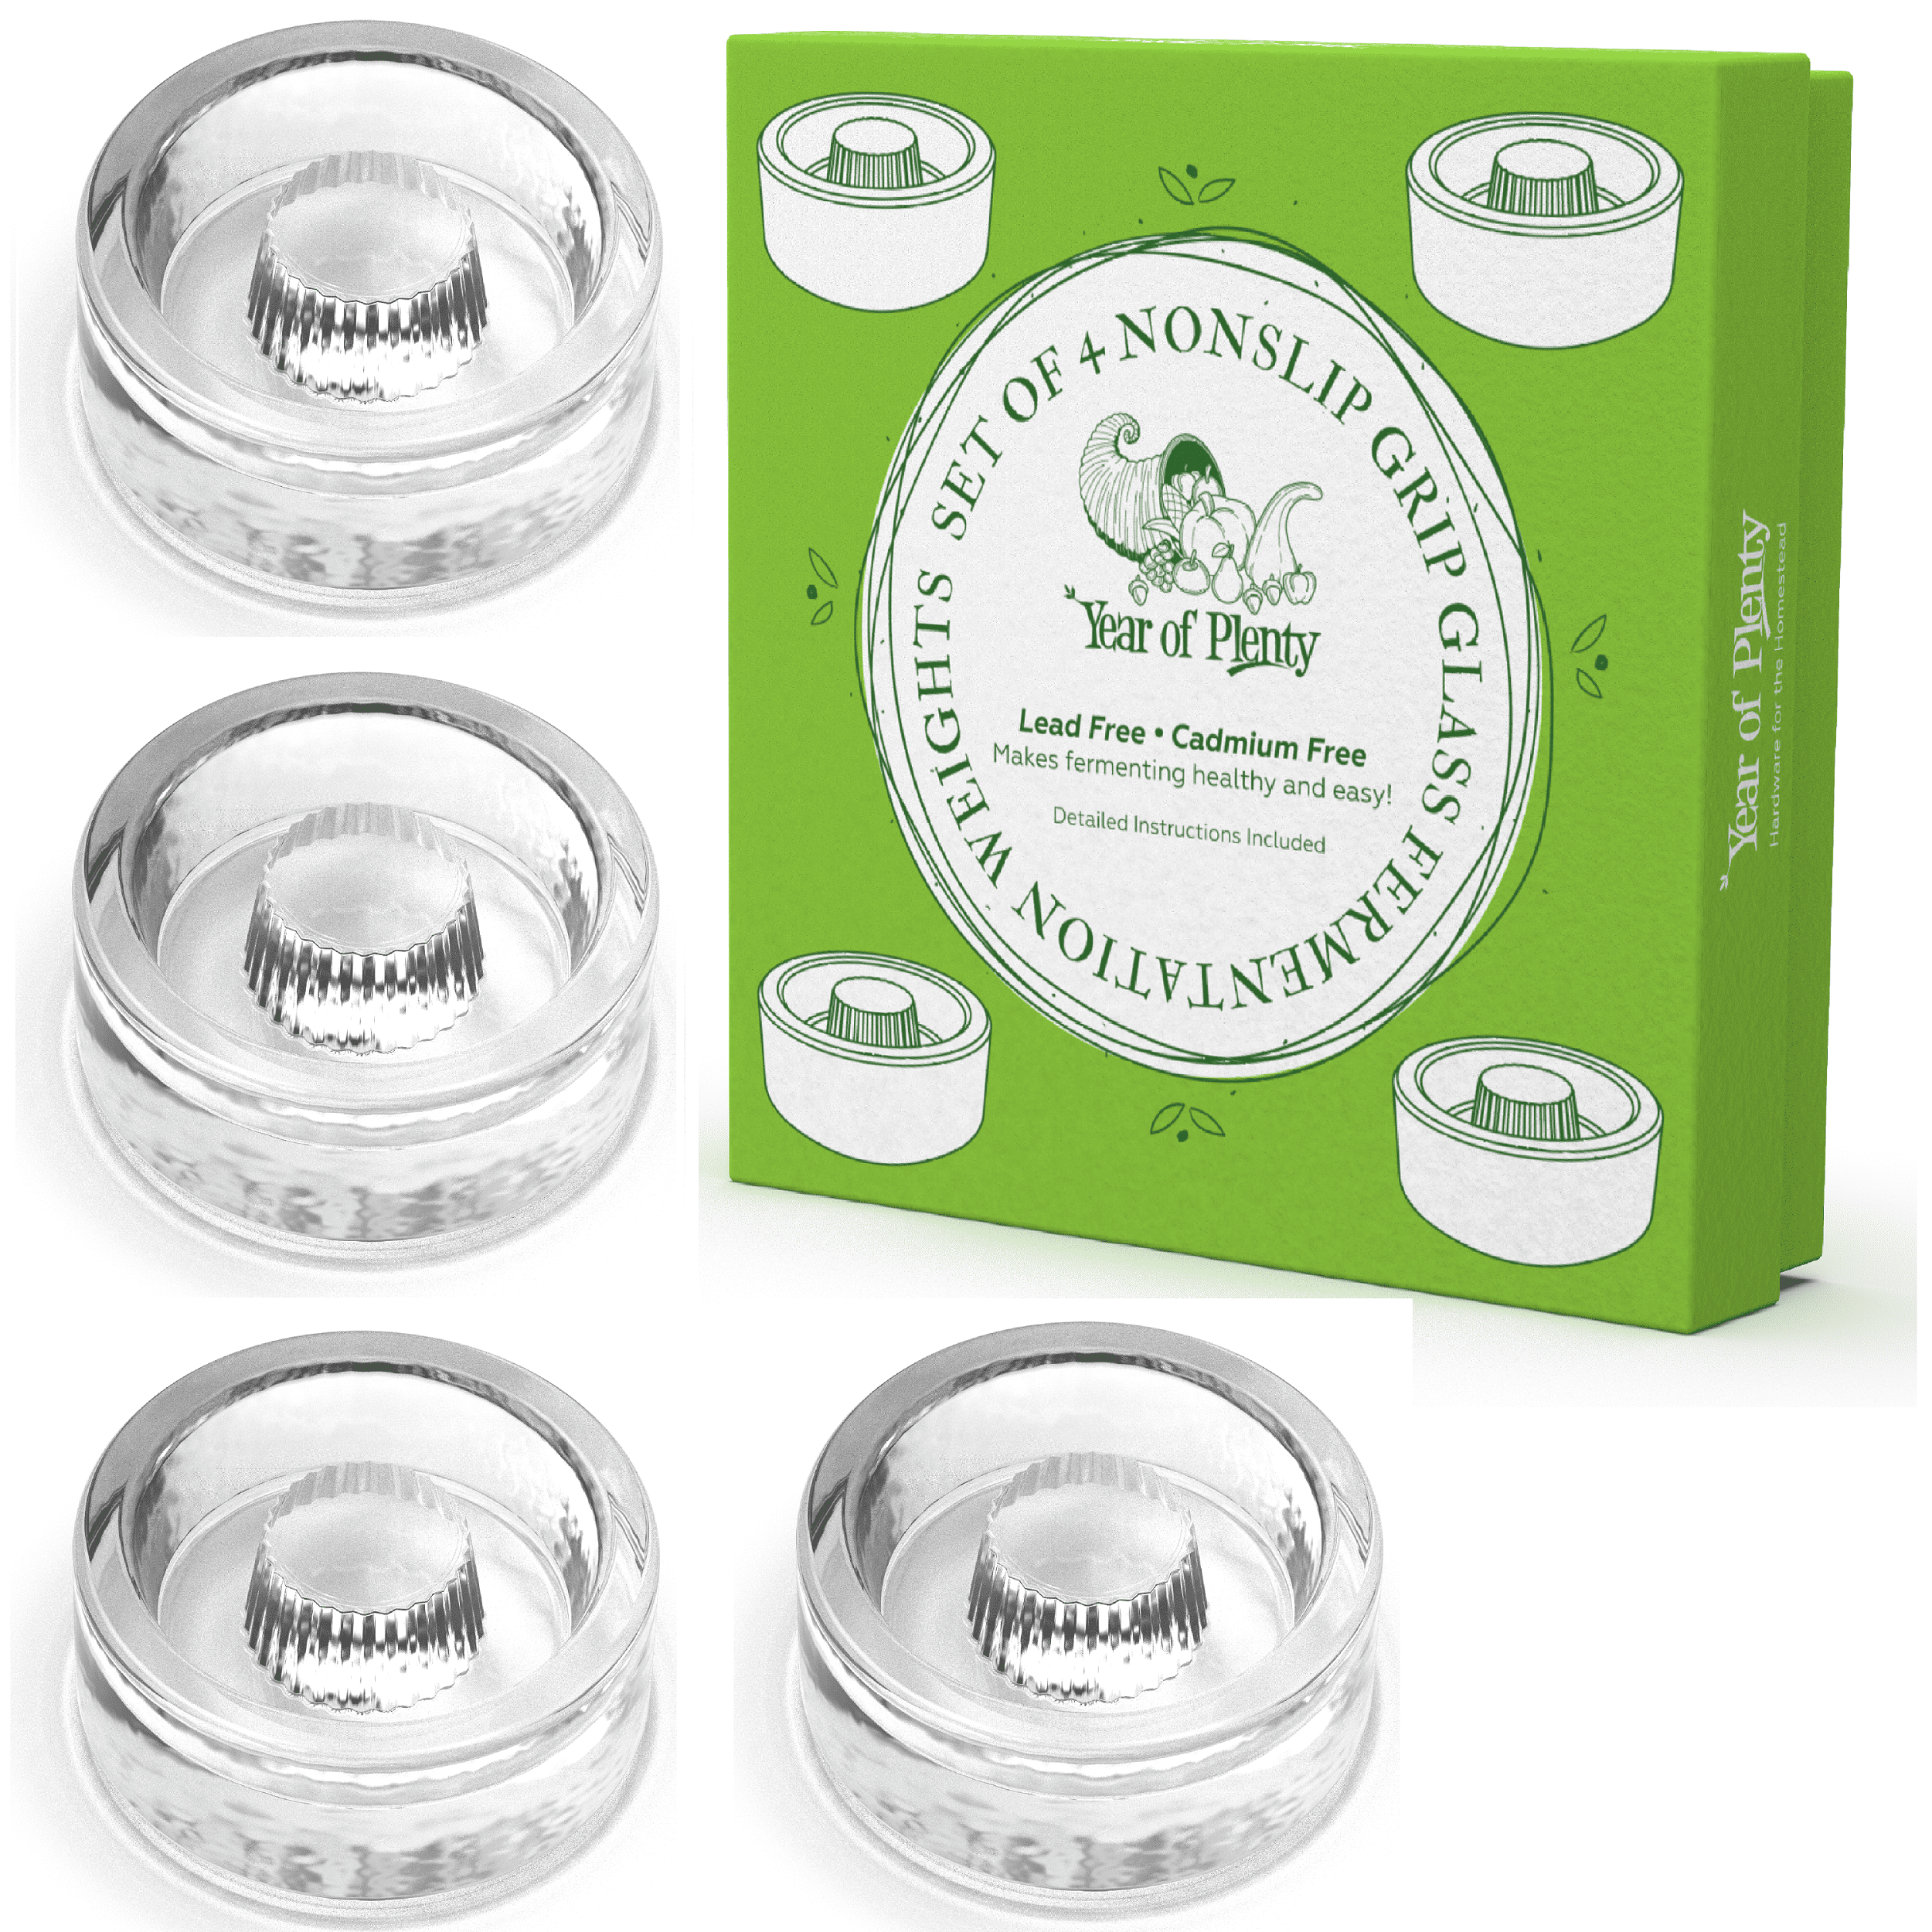 For Small Batch Sauerkraut 3-Pack suitable for ANY Wide Mouth Mason Jars Pickles or Other Fermented Foods Fermenting TMKEFFC Fermentation Weights with Grooved Handles and Wavy Grain Dot